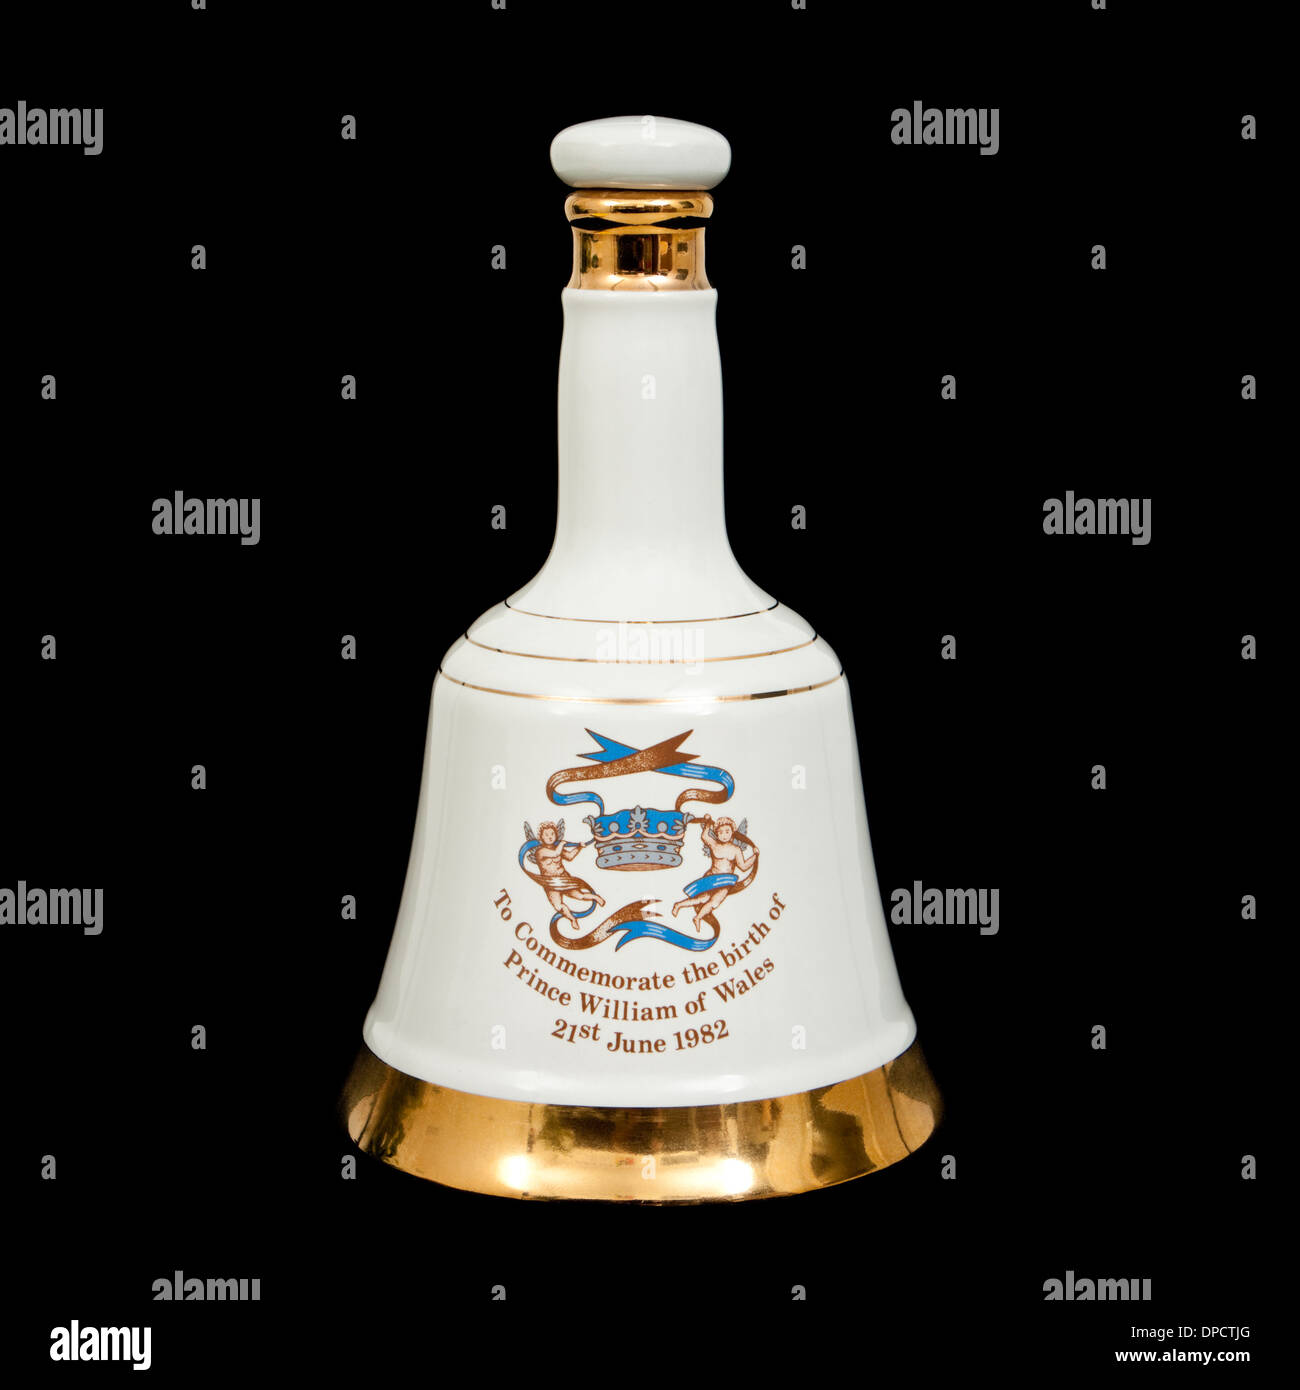 Bell's Scotch Whisky porcelain Royal Decanter made by Wade, commemorating the Birth of Prince William of Wales on 21st June 1982 Stock Photo